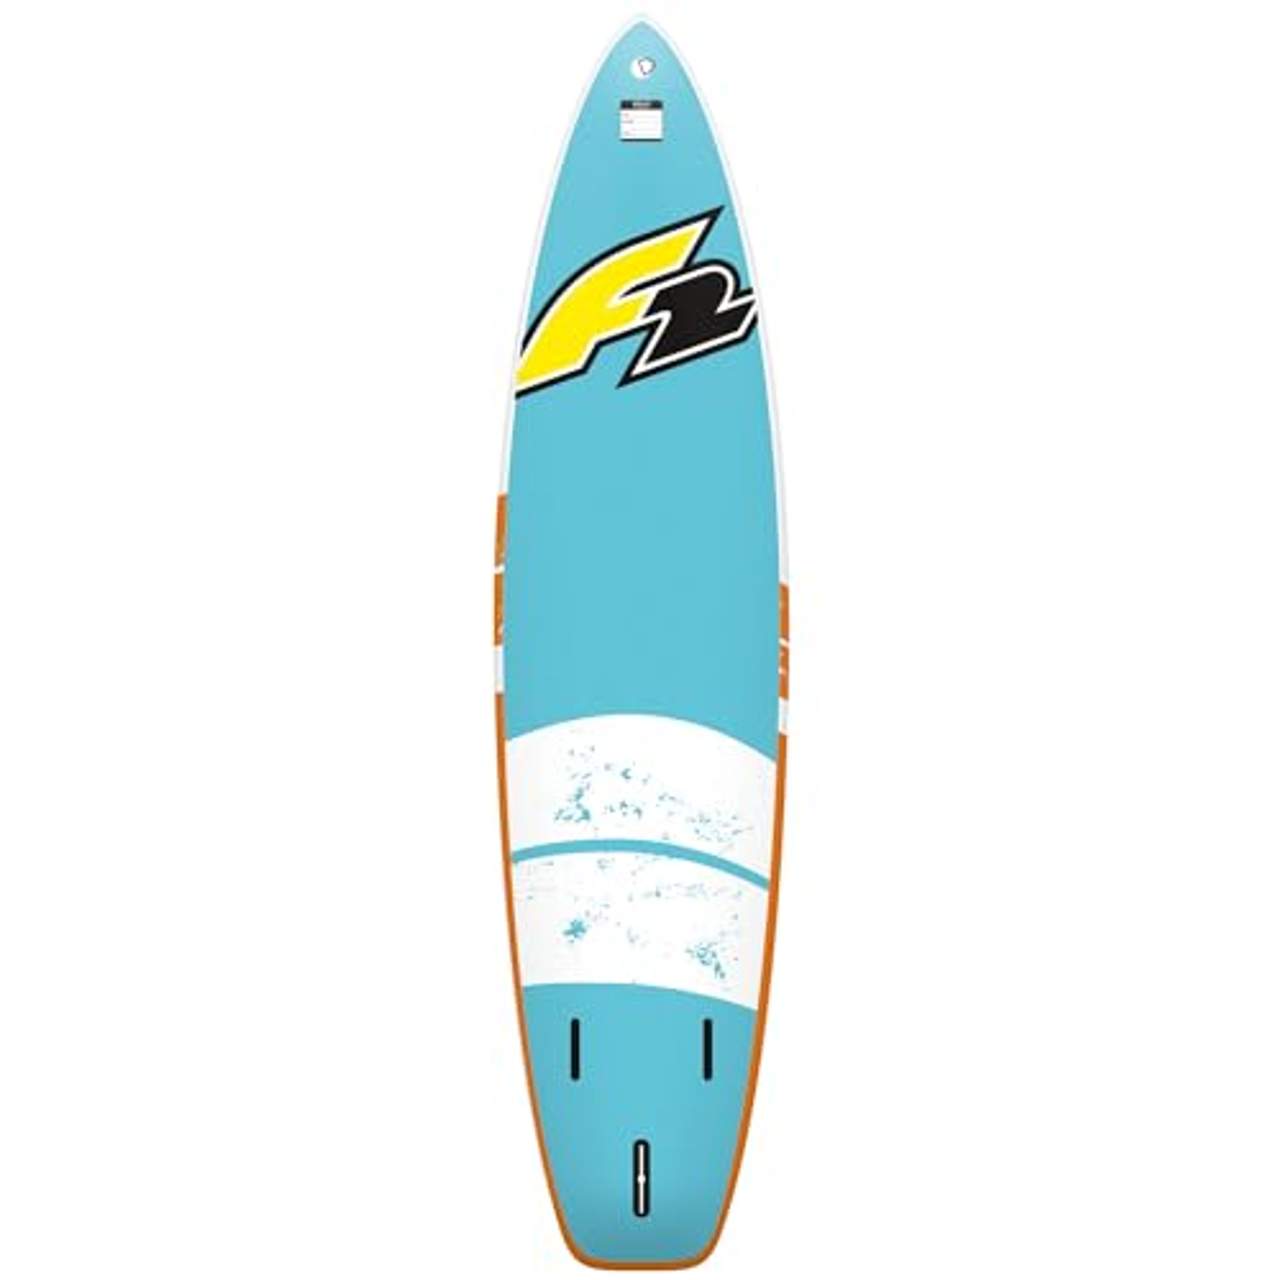 Campsup SUP F2 Sunset 11'8" Turquoise Aufblasbares Stand Up Paddle Board